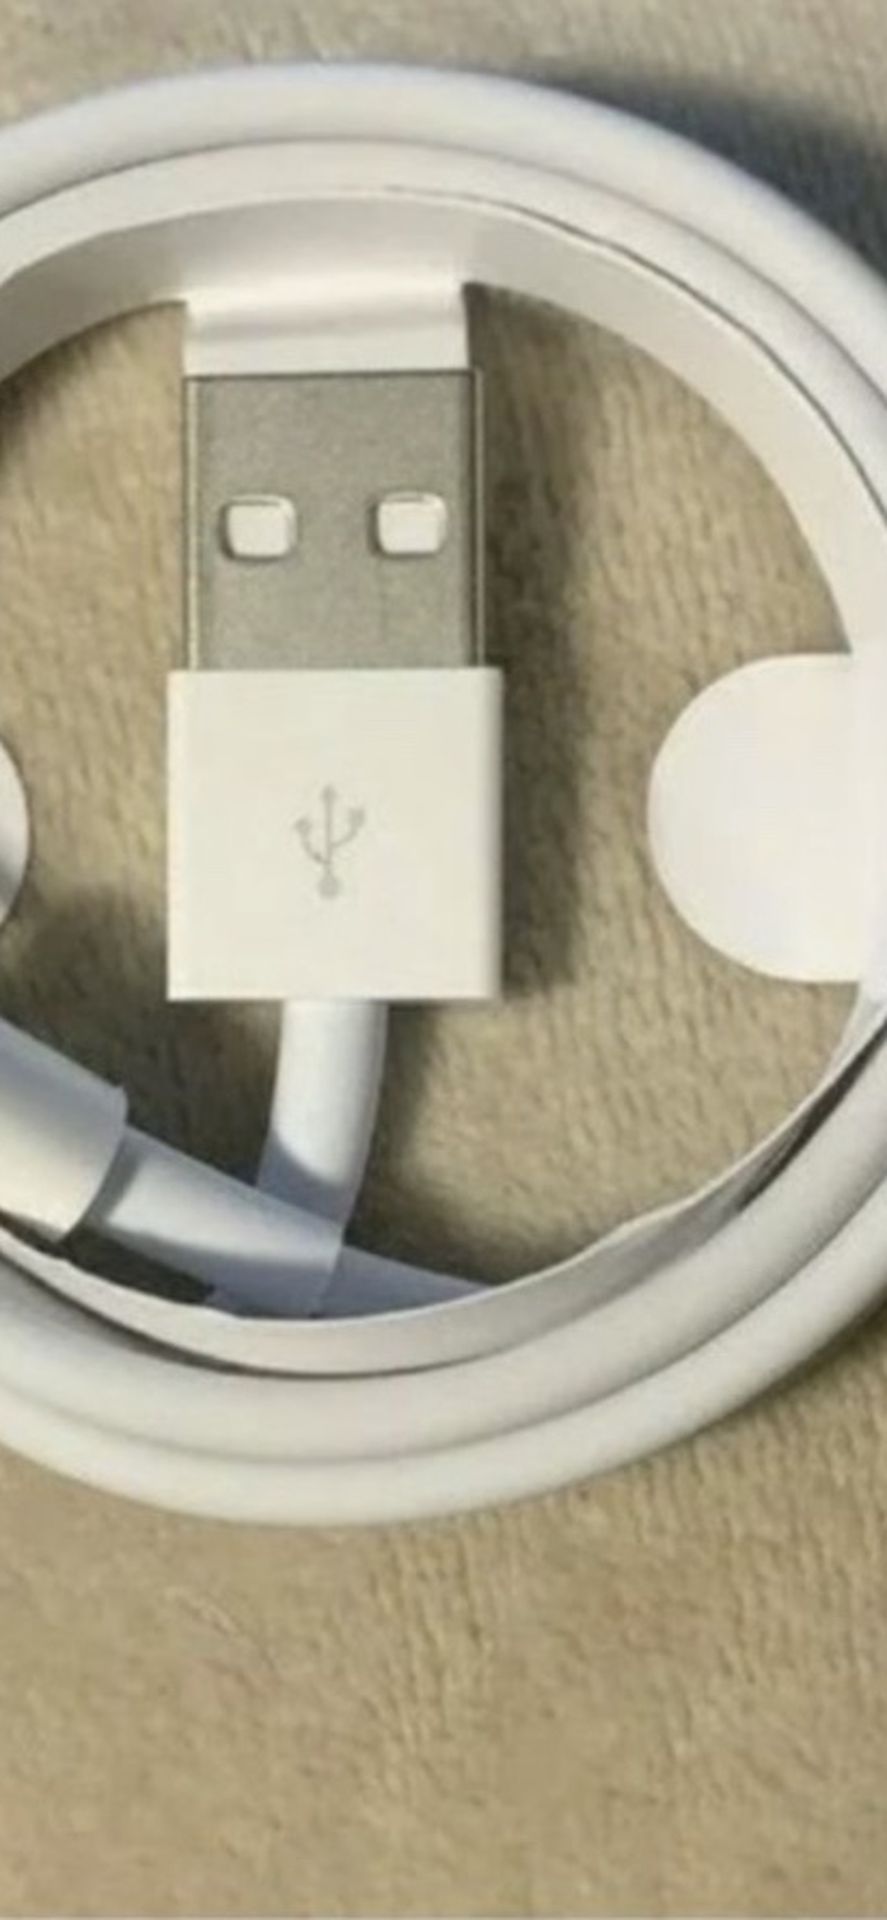 Brand New Original Apple iPhone Charger